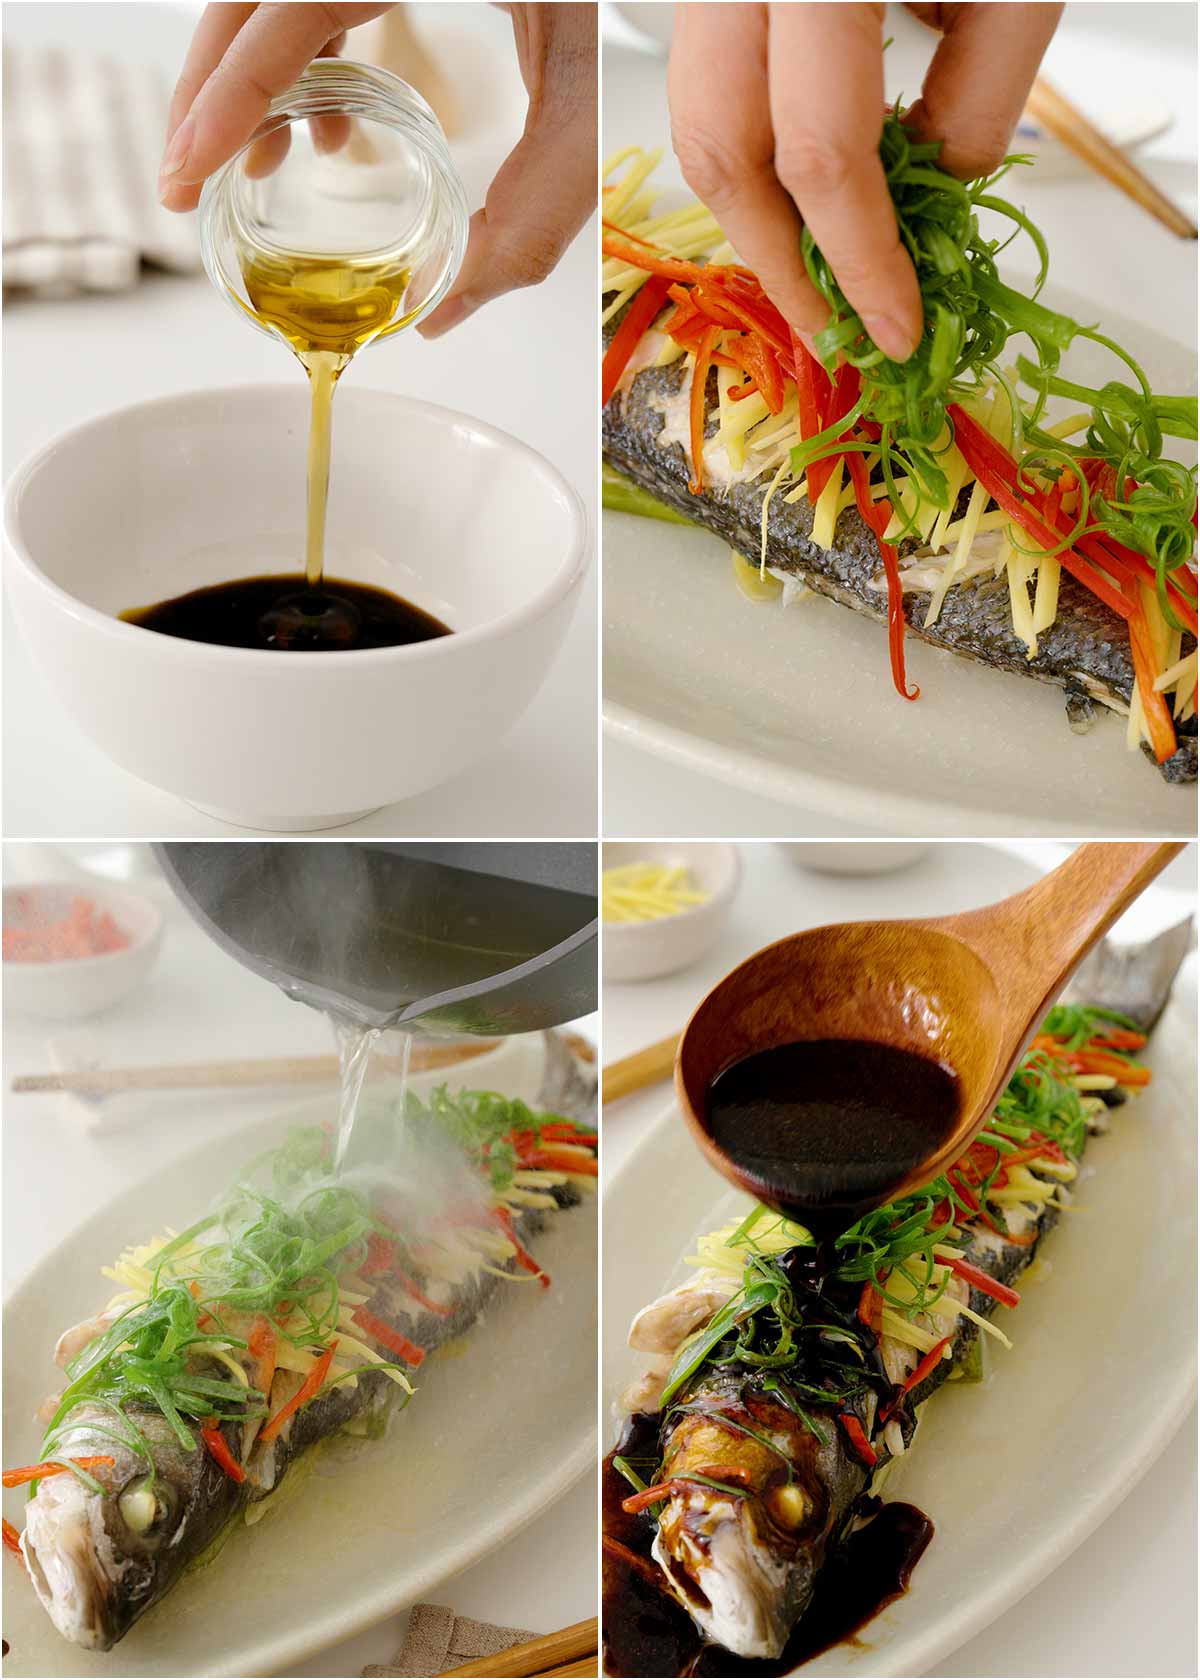 4 image collage showing how to prepare sauce and how to serve the steamed fish.